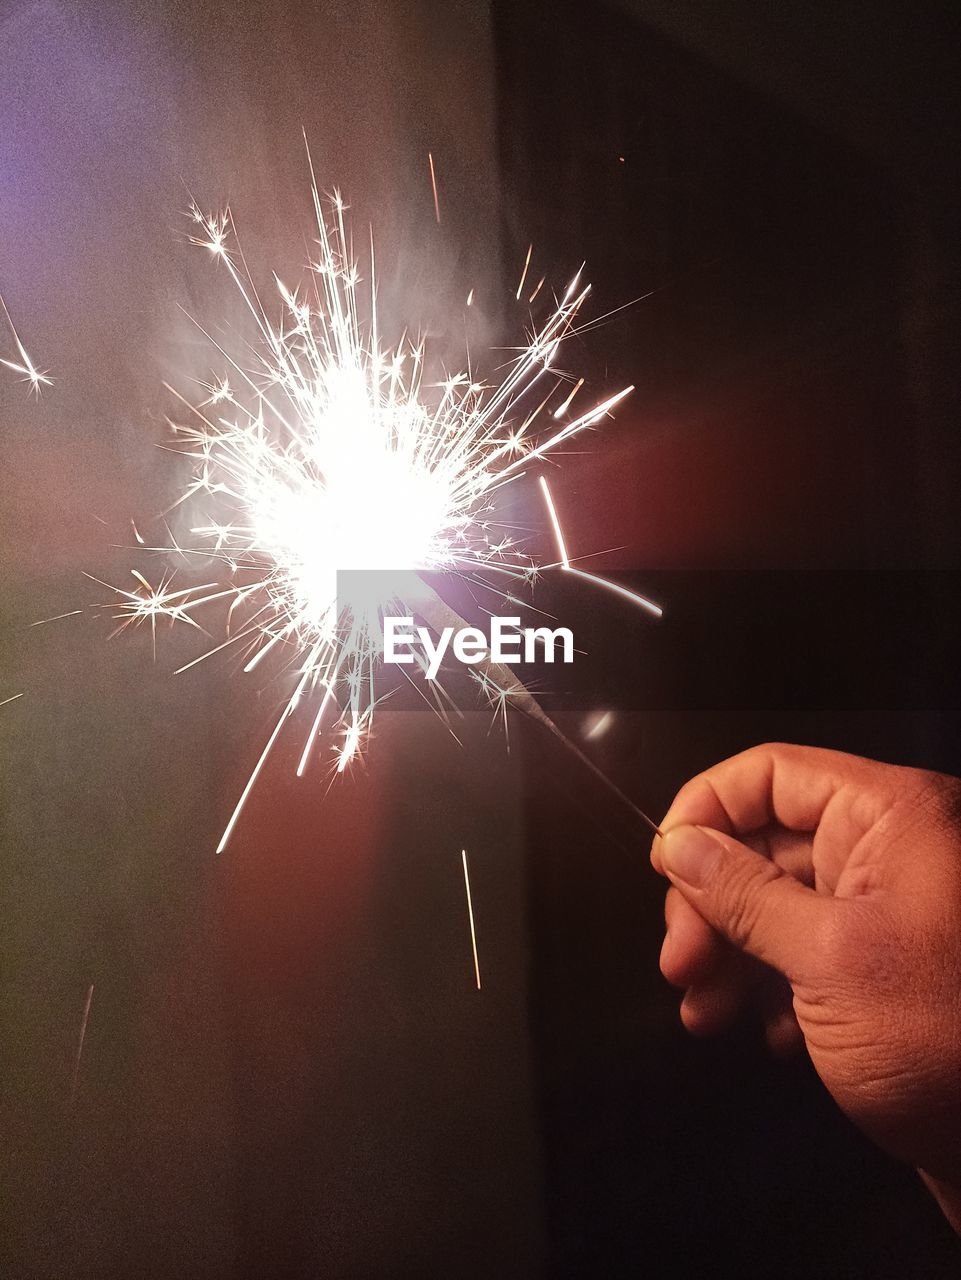 hand, fireworks, sparkler, motion, event, arts culture and entertainment, holding, sparks, one person, celebration, blurred motion, burning, glowing, illuminated, exploding, long exposure, finger, firework - man made object, firework display, light, adult, men, fire, flower, close-up